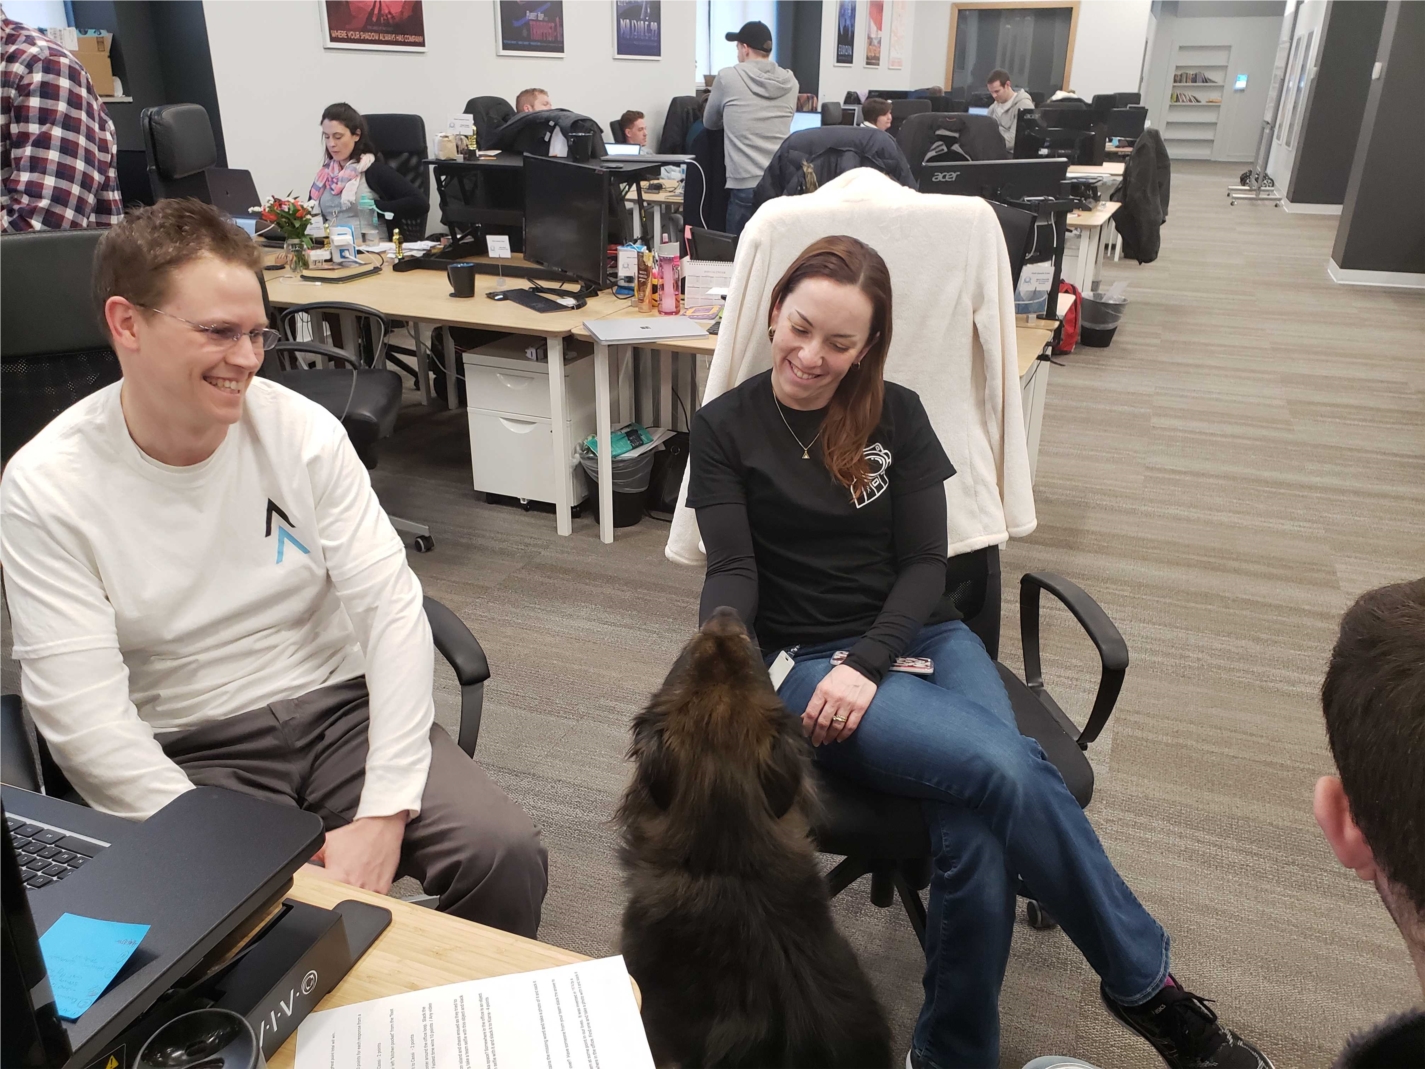 Four-legged coworkers are common at Viral Launch - we have a dog-friendly office space and lots of dog-loving crew members!